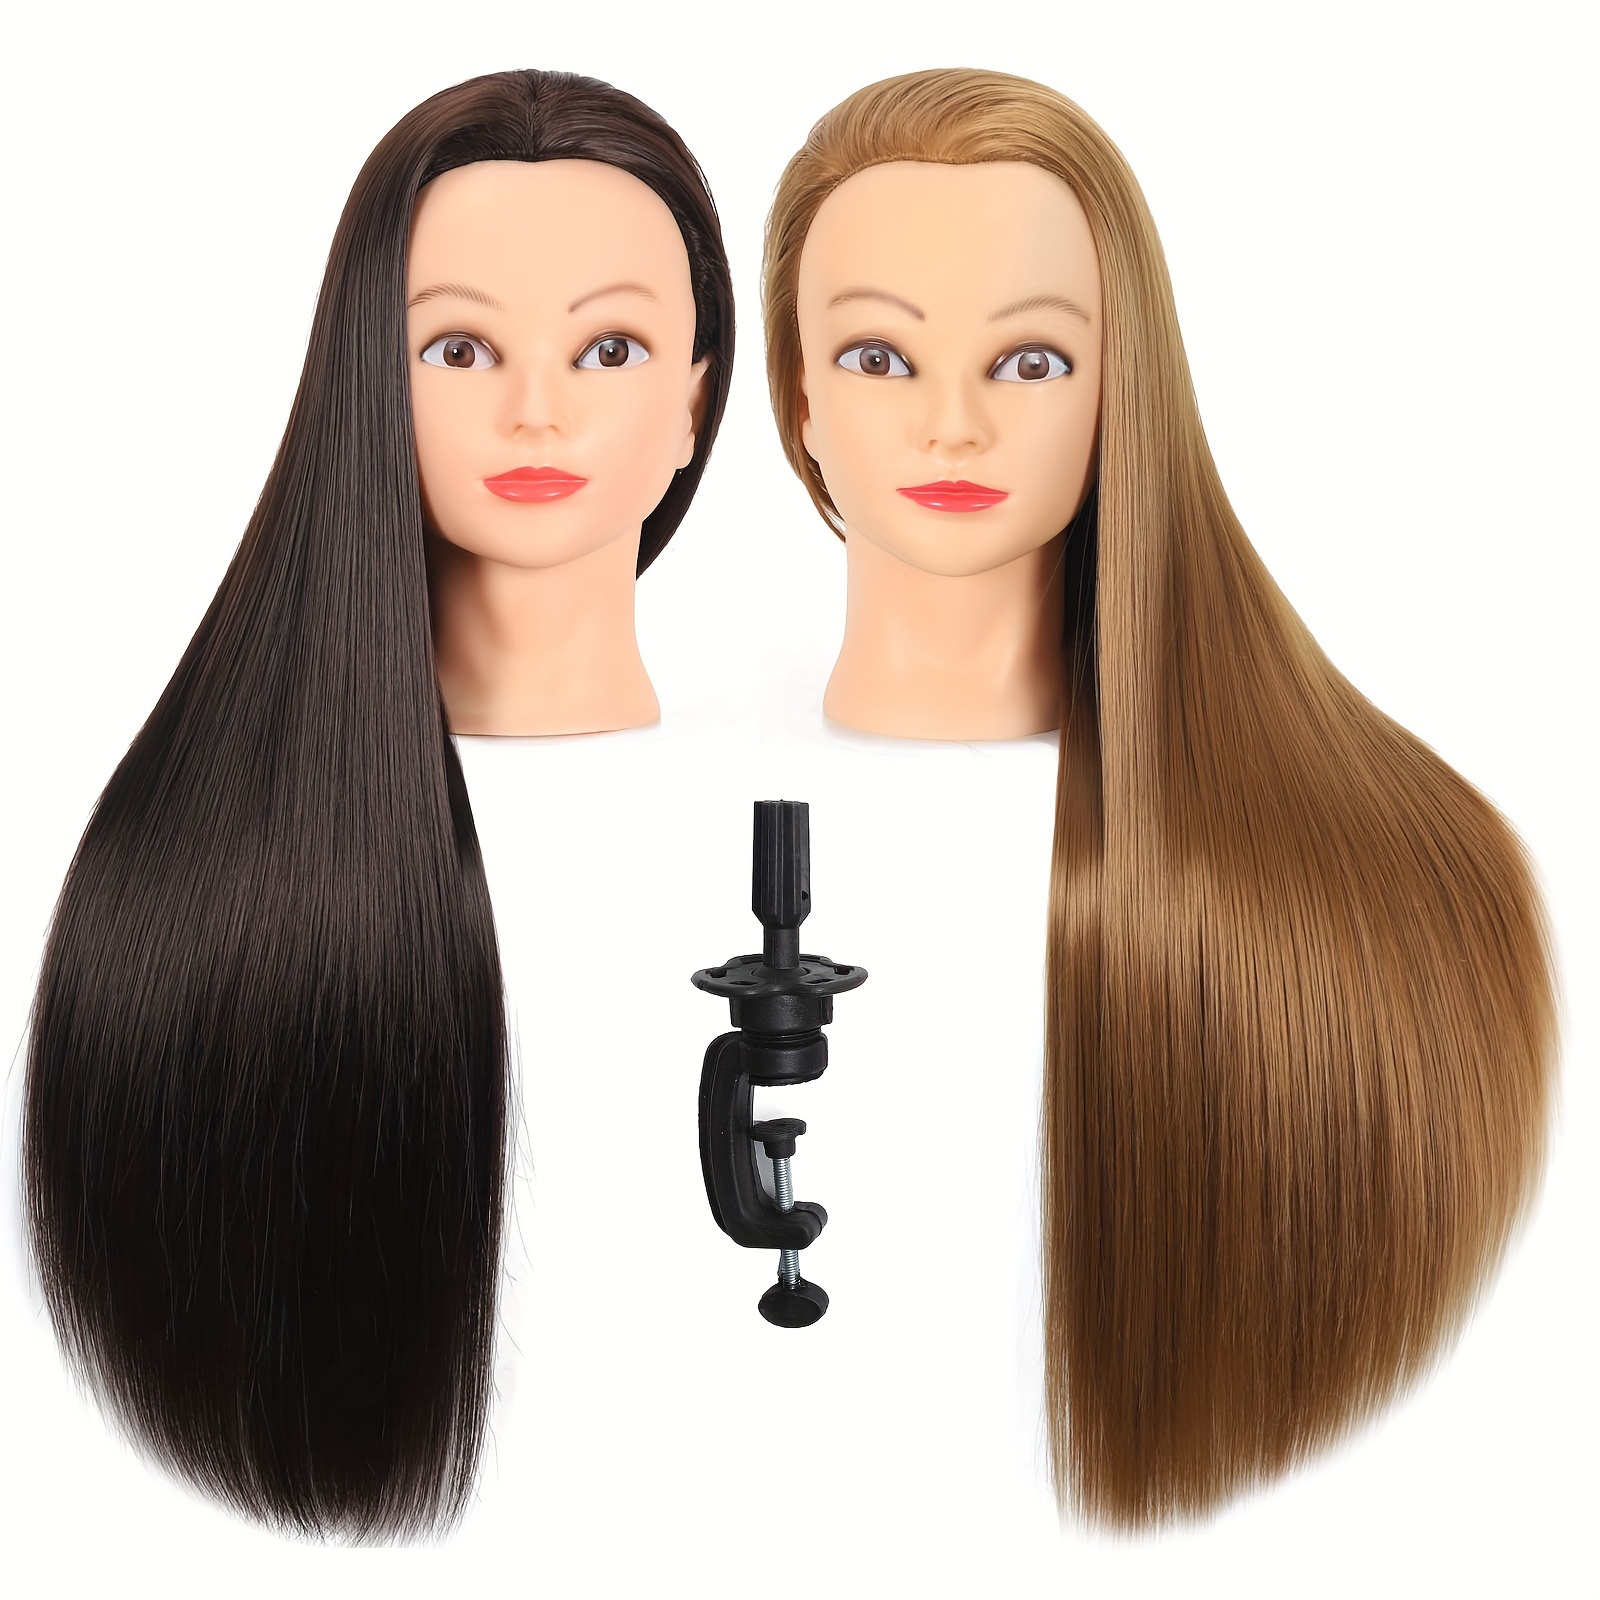 100% Real Hair Practice Training Head Mannequin Hairdressing Doll With  Clamp